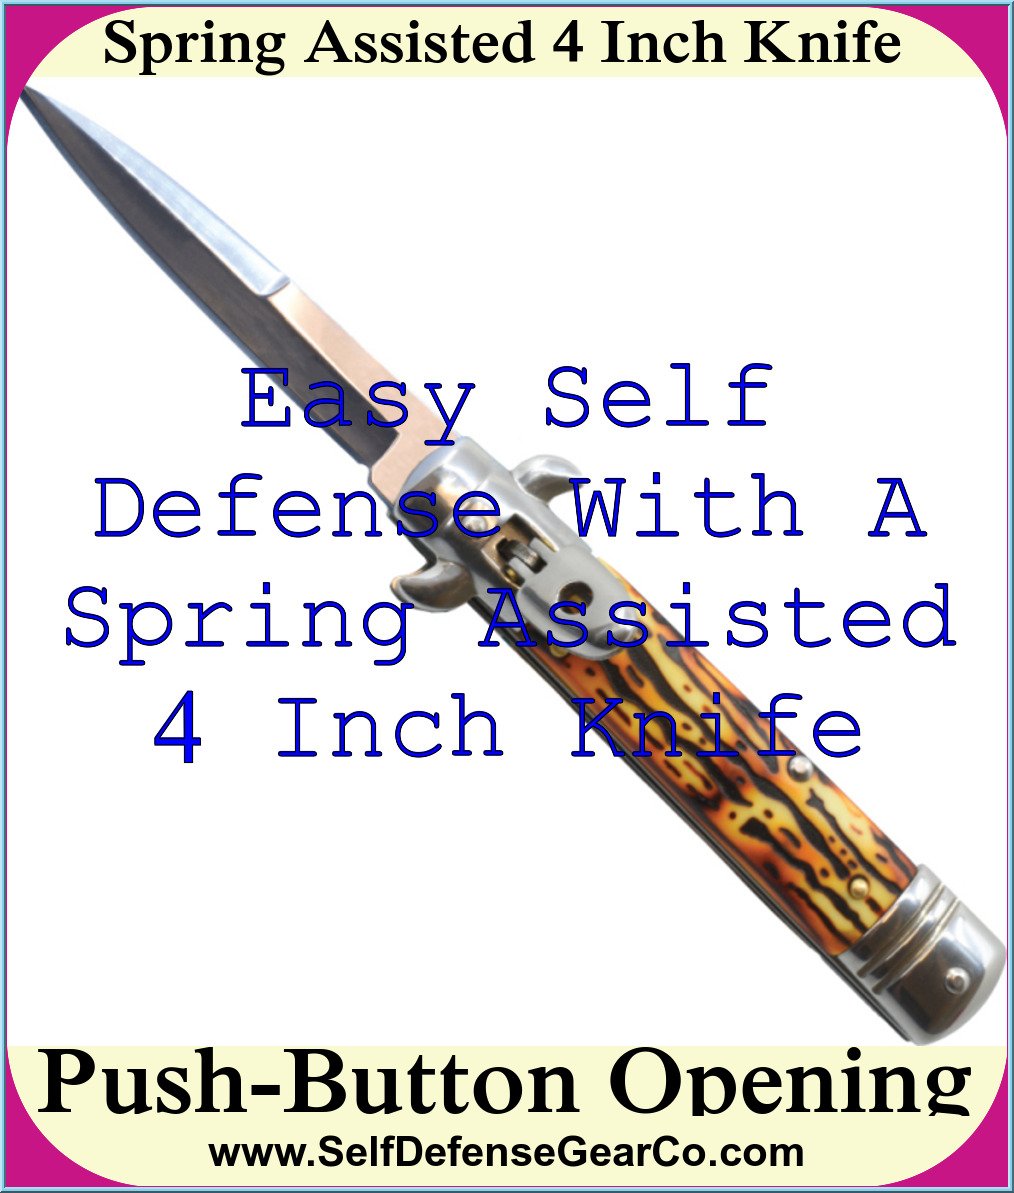 Spring Assisted 4 Inch Knife